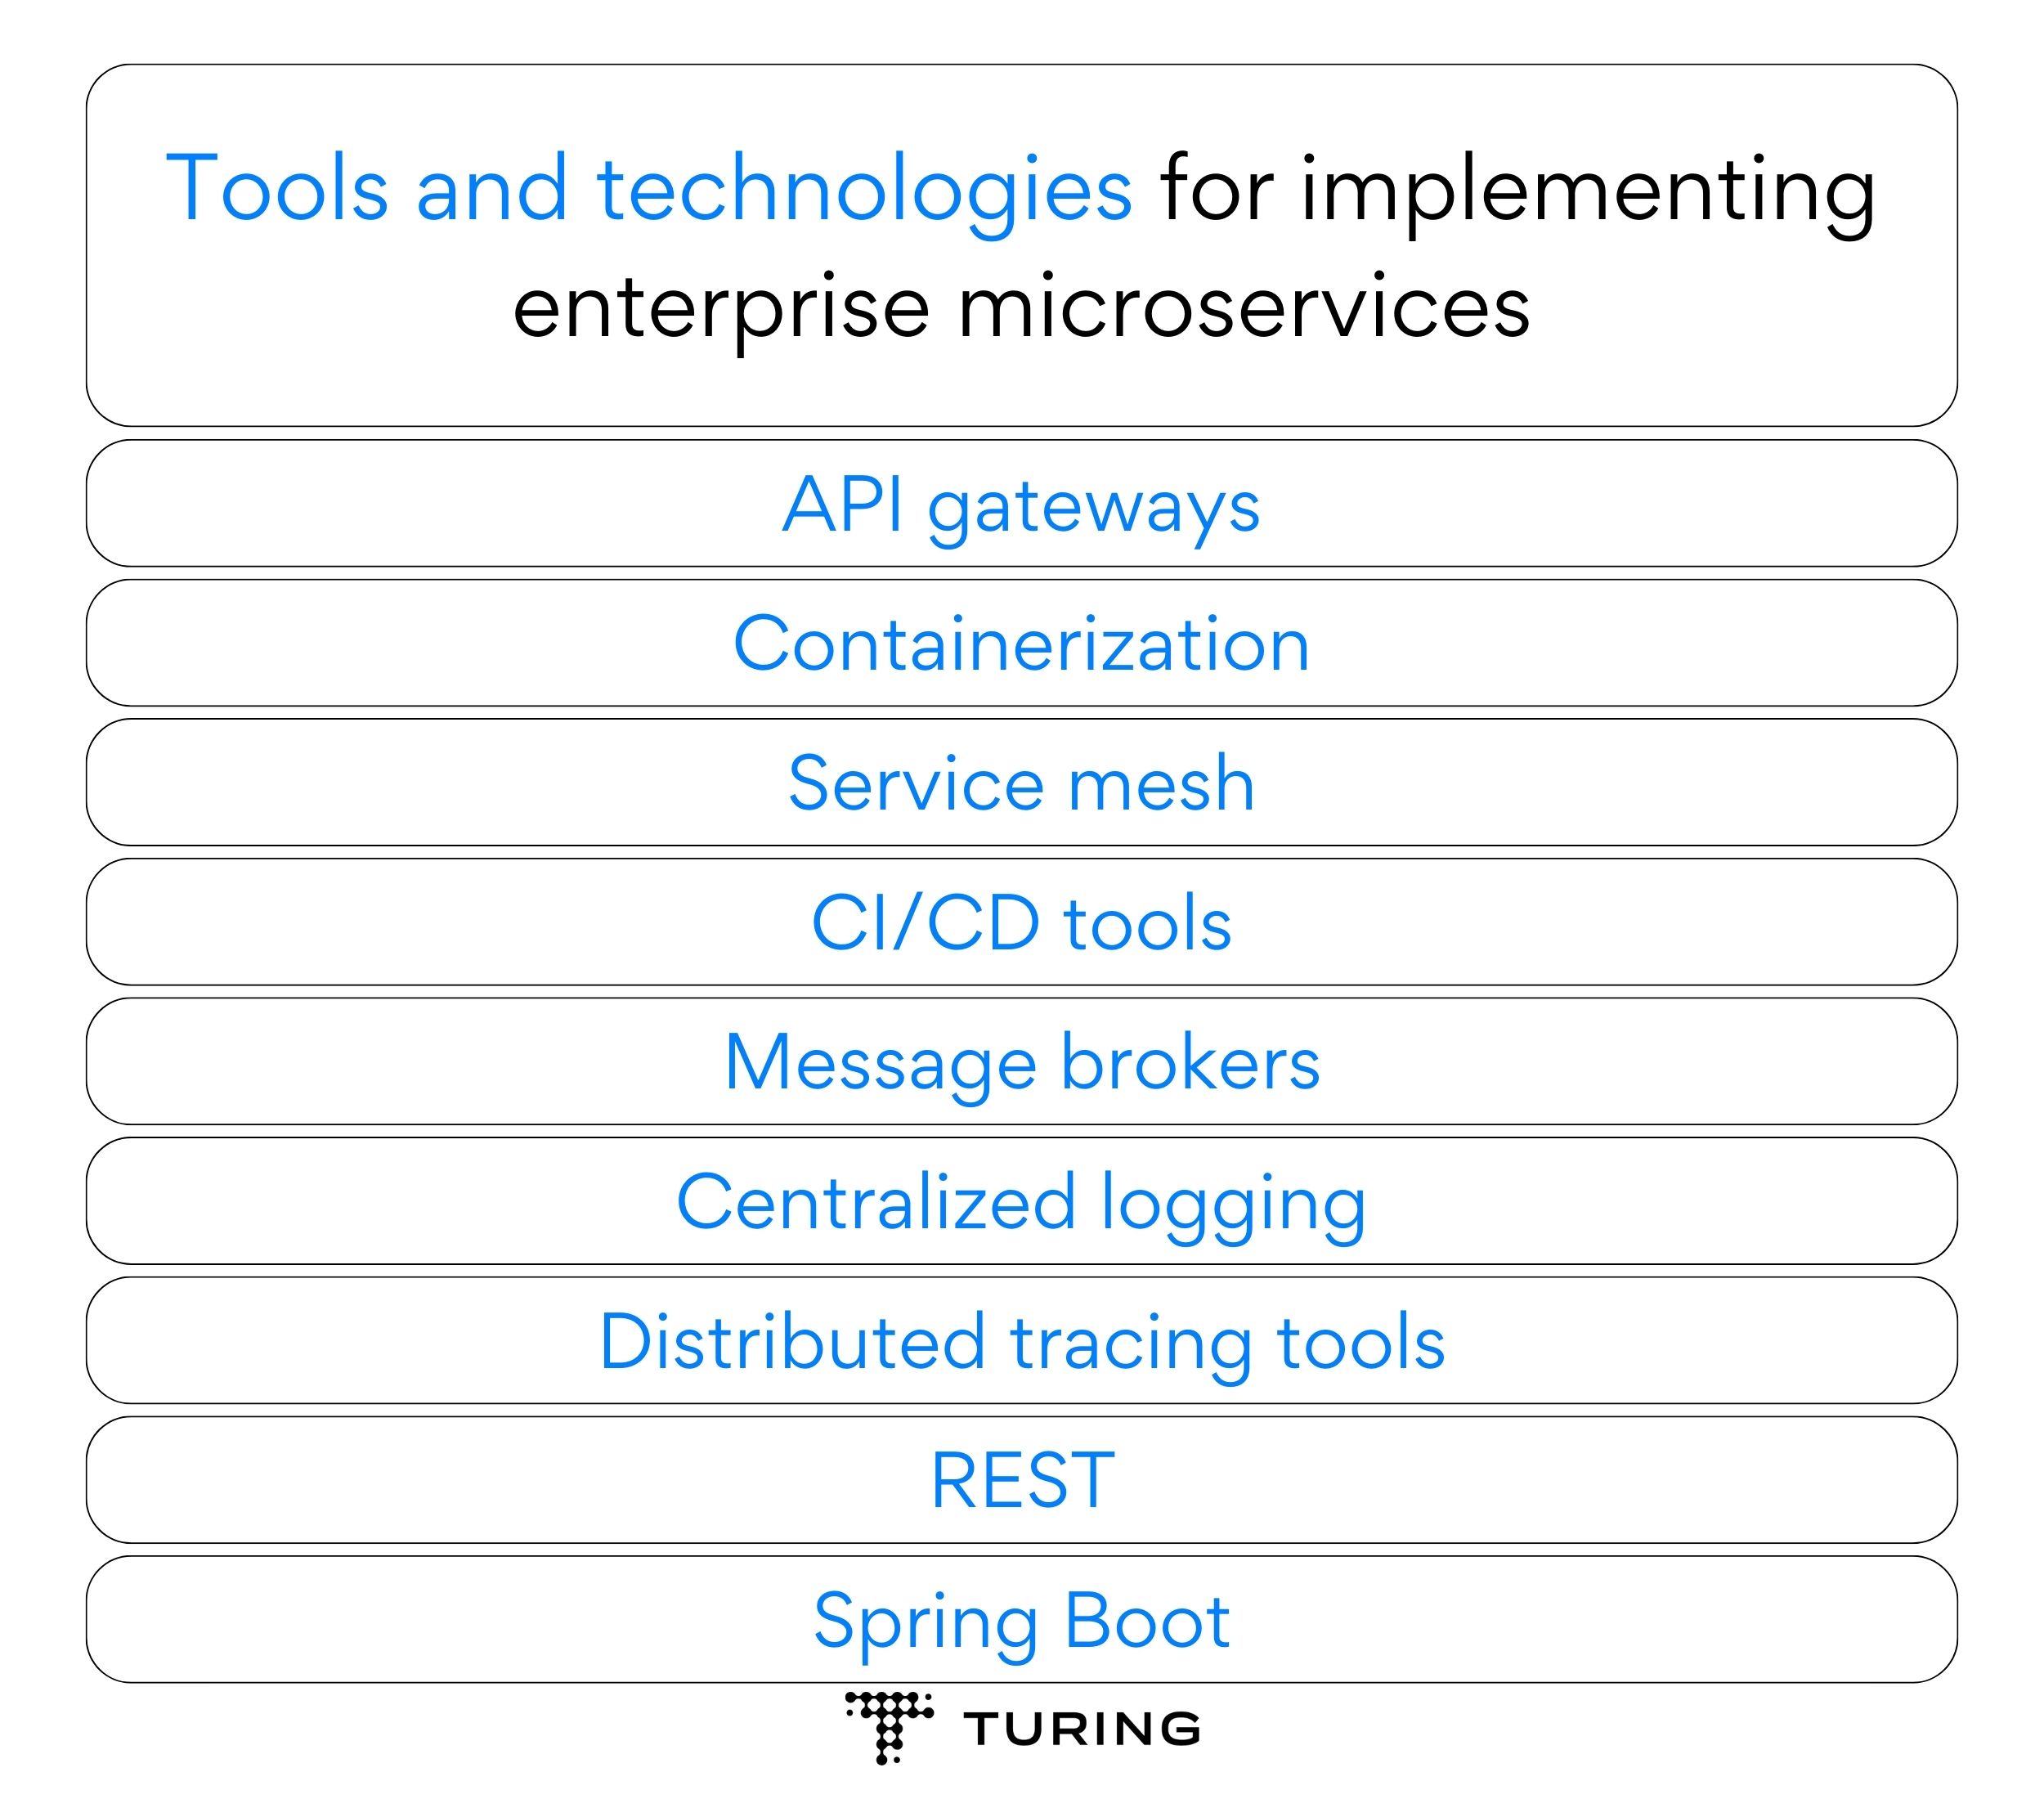 Tools and technologies for implementing enterprise microservices